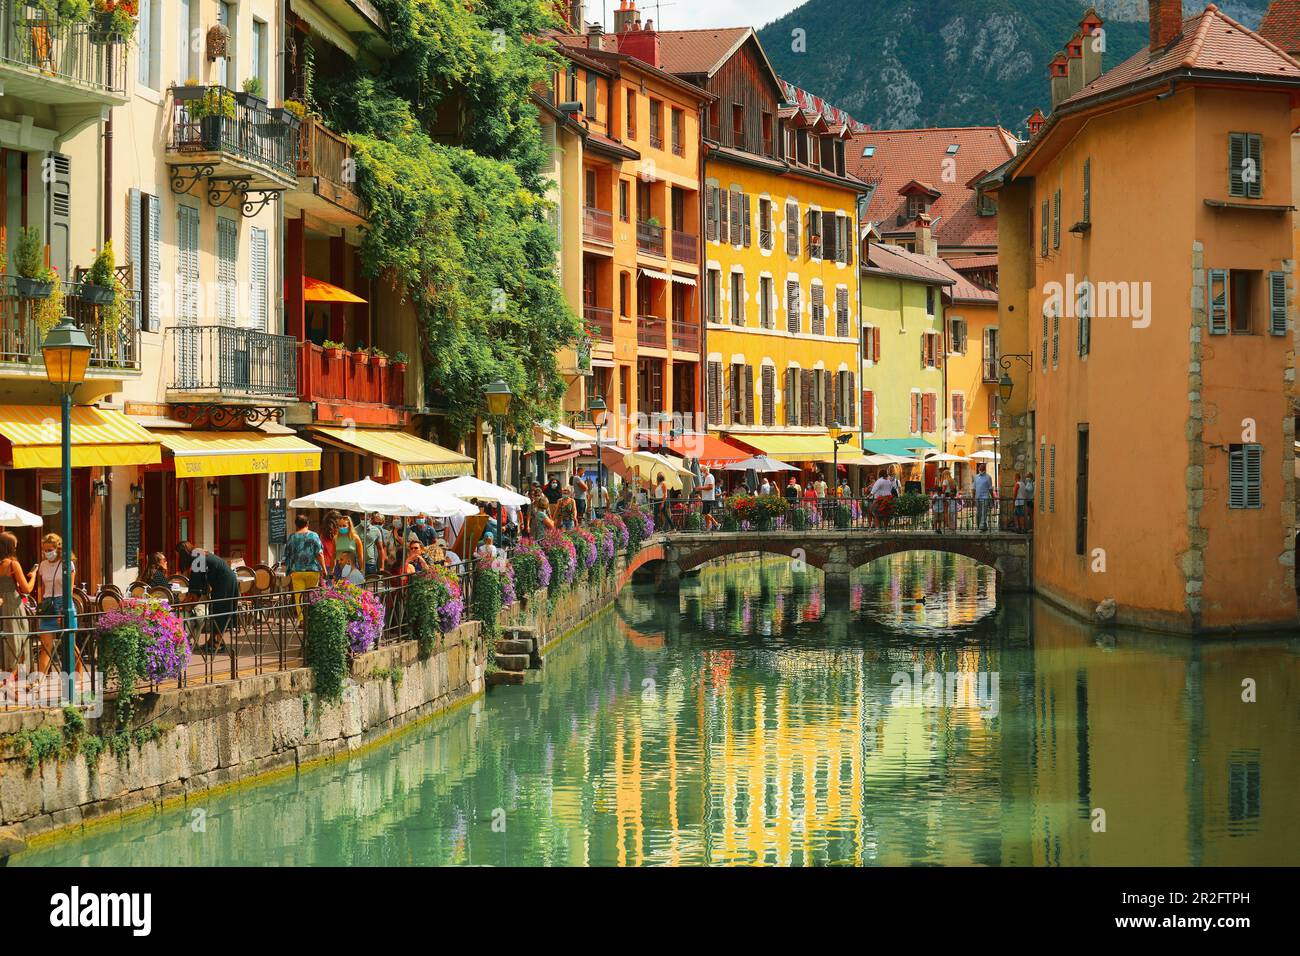 Annecy, France, - August, 22, 2020: Colourful medieval houses reflected in water of the canal in Annecy, France Stock Photo